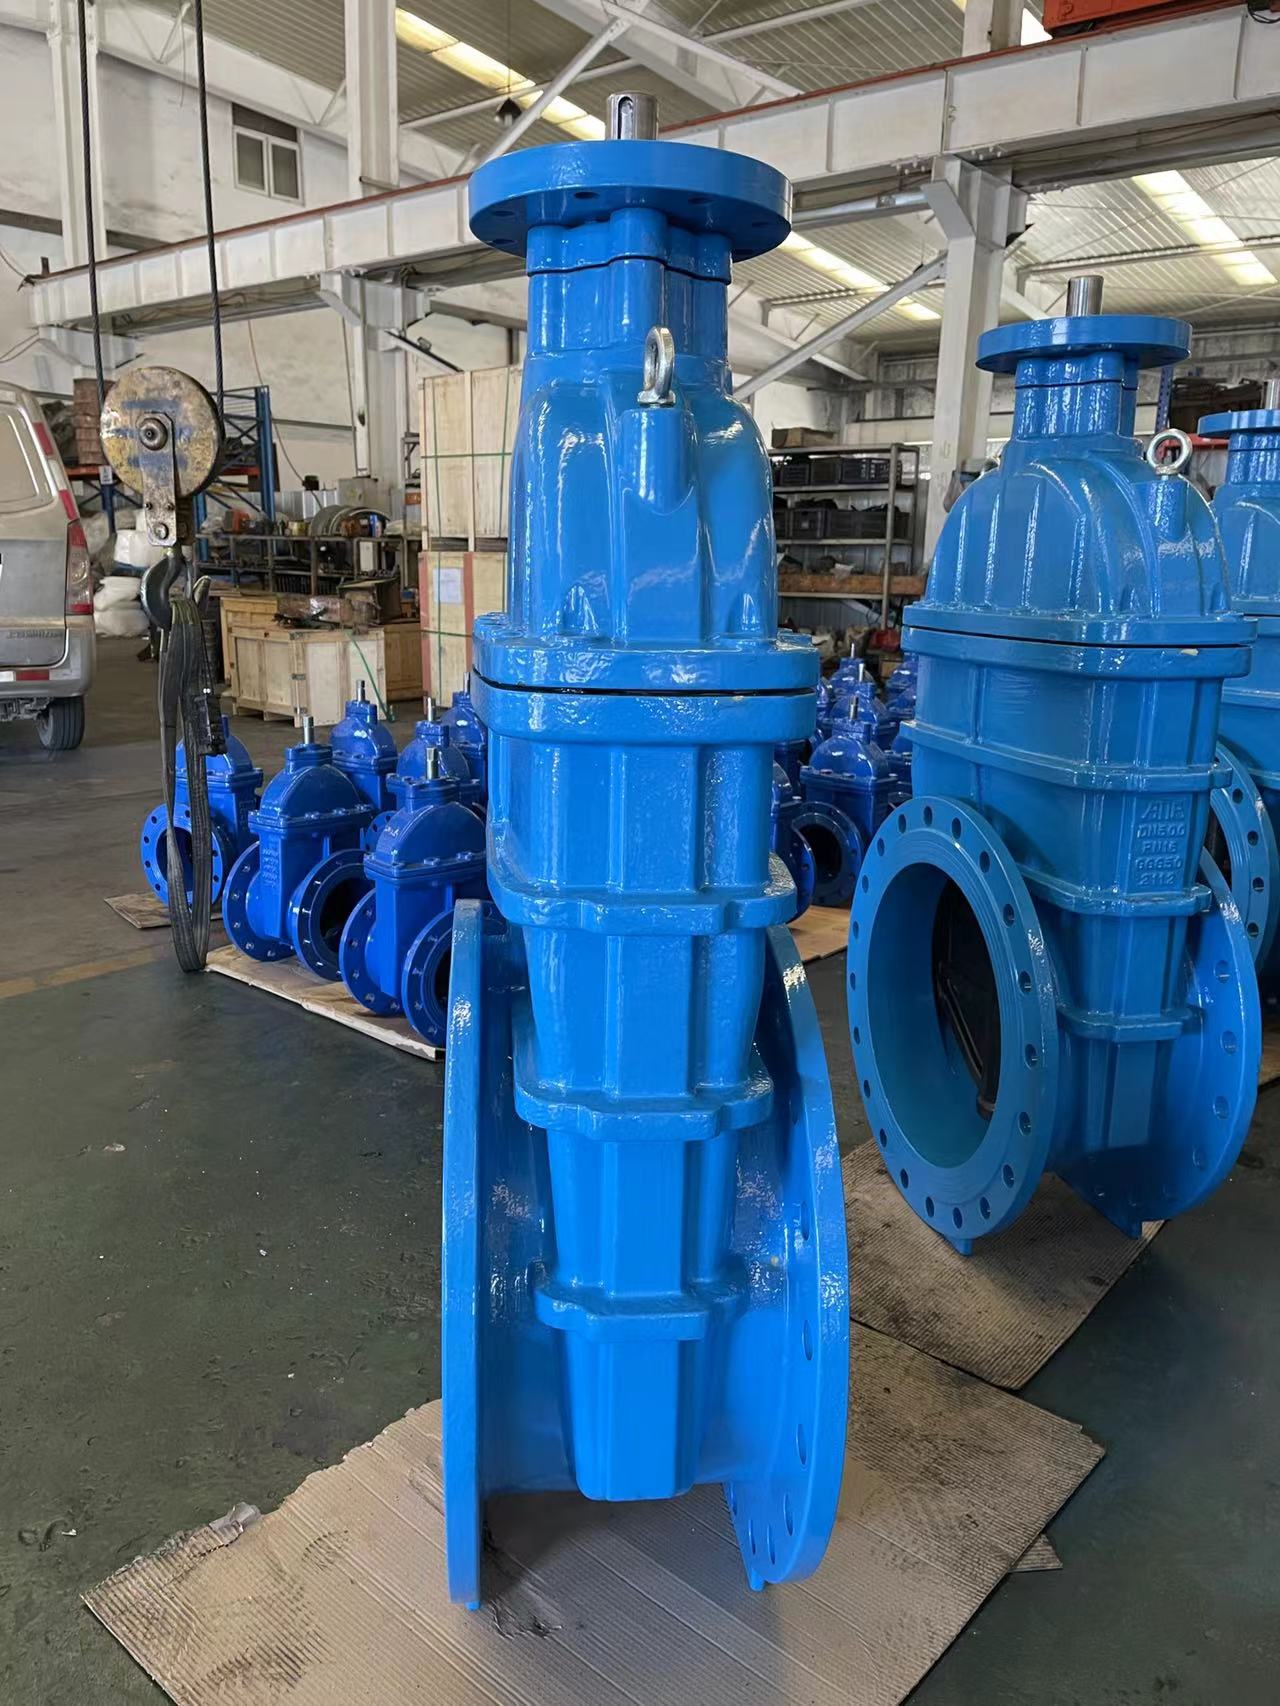 Why do gate valves require upper sealing devices?